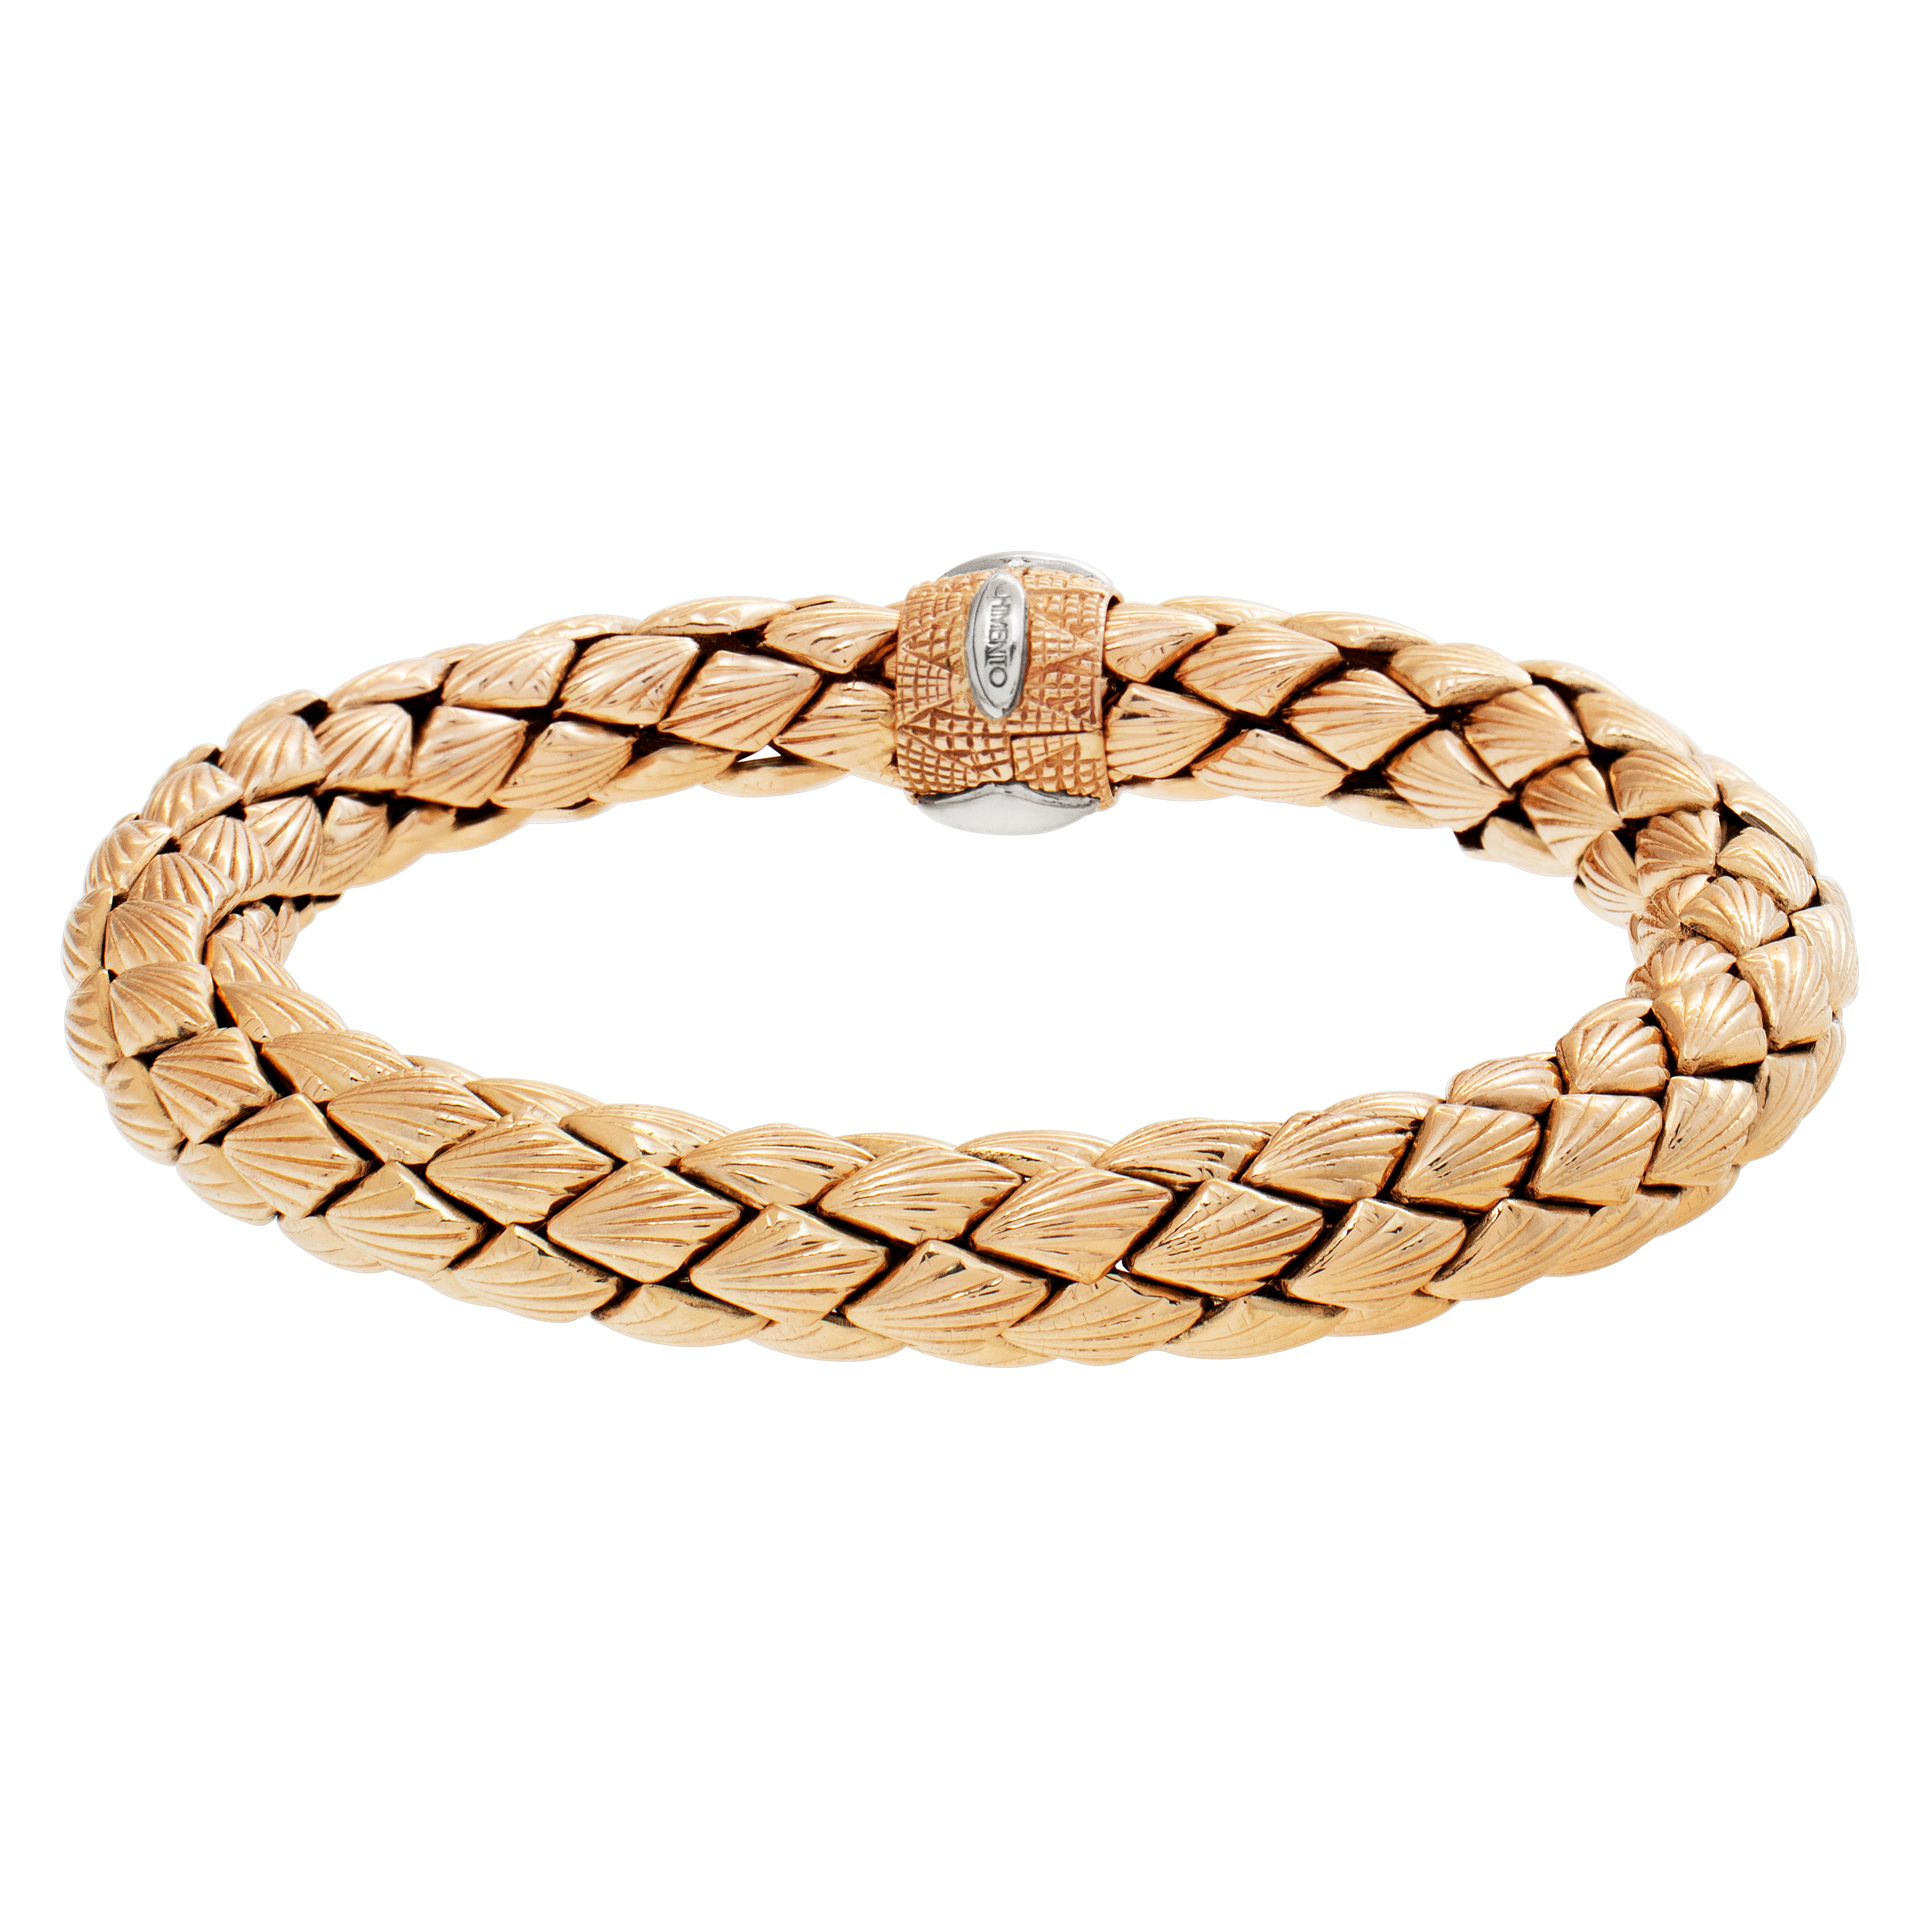 Chimento breaded bracelet in 18k rose gold with diamond accent on the clasp image 1